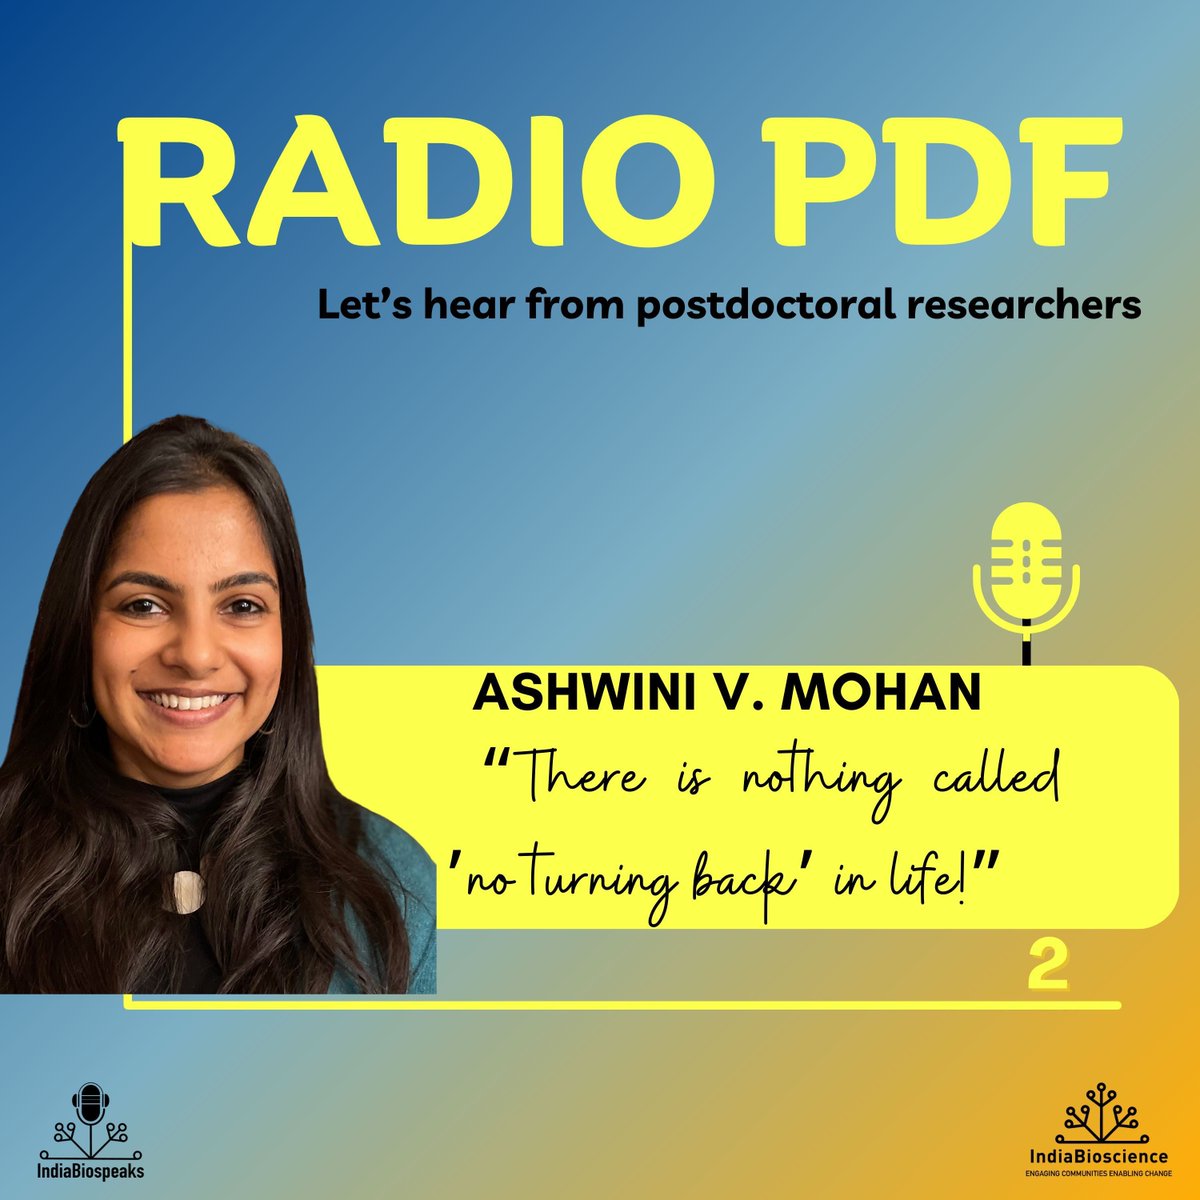 The second episode of our much-loved #podcast series - RADIO PDF (a brand new season) is now live! 🤩 Join our conversation with @crazy_chipkali, a post-doctoral fellow @UniNeuchatel 😄 Podcast team: @Arushi_Batra28 and @AgastyaSingh Listen 👉 buff.ly/3wJablT